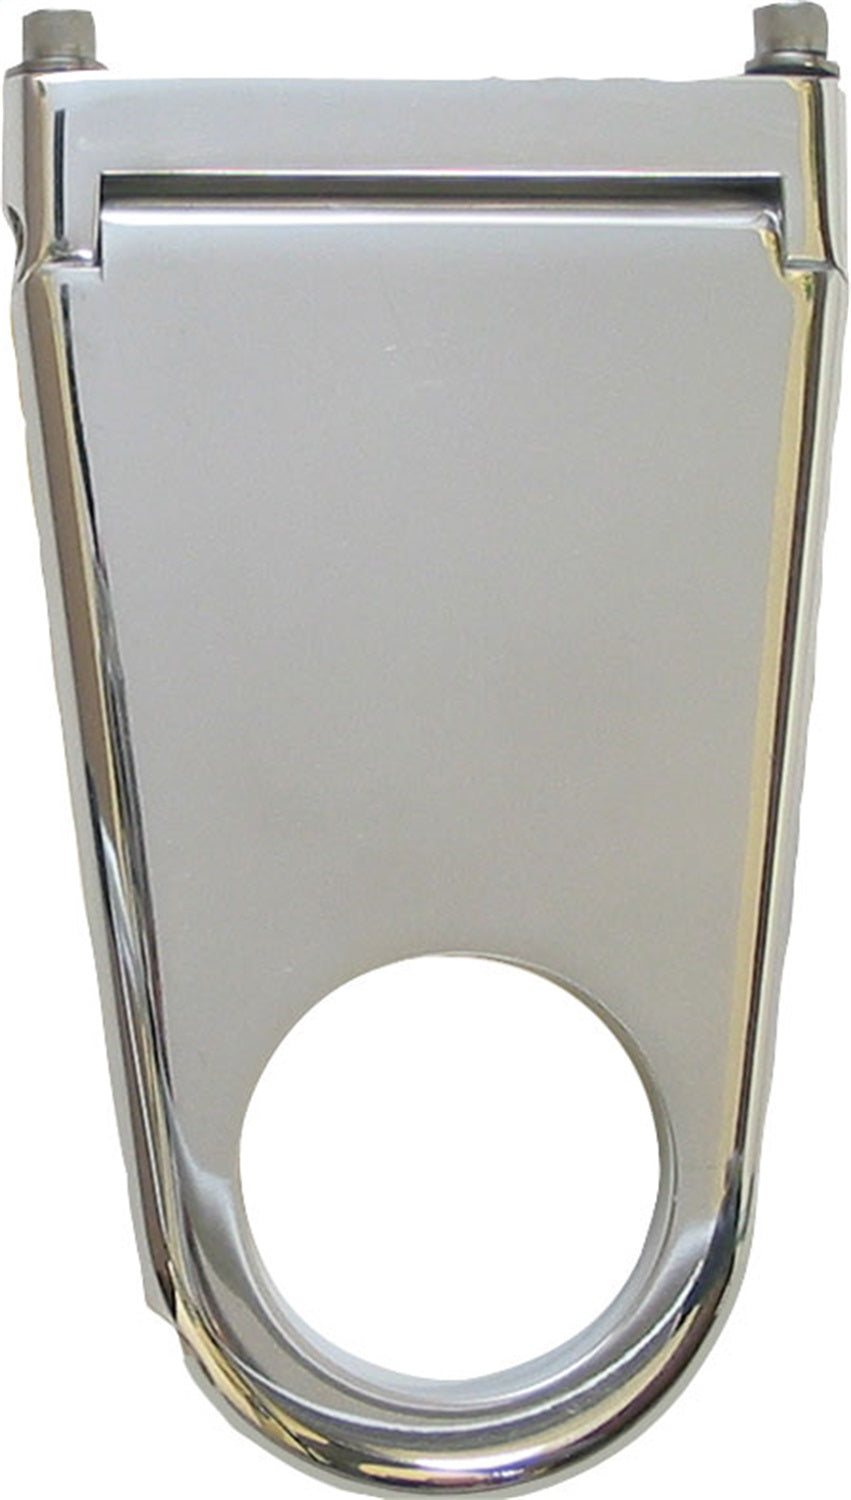 Borgeson Column Drop Blank Style 2-3/8in. Column X 3in. Drop Polished Aluminum 911233